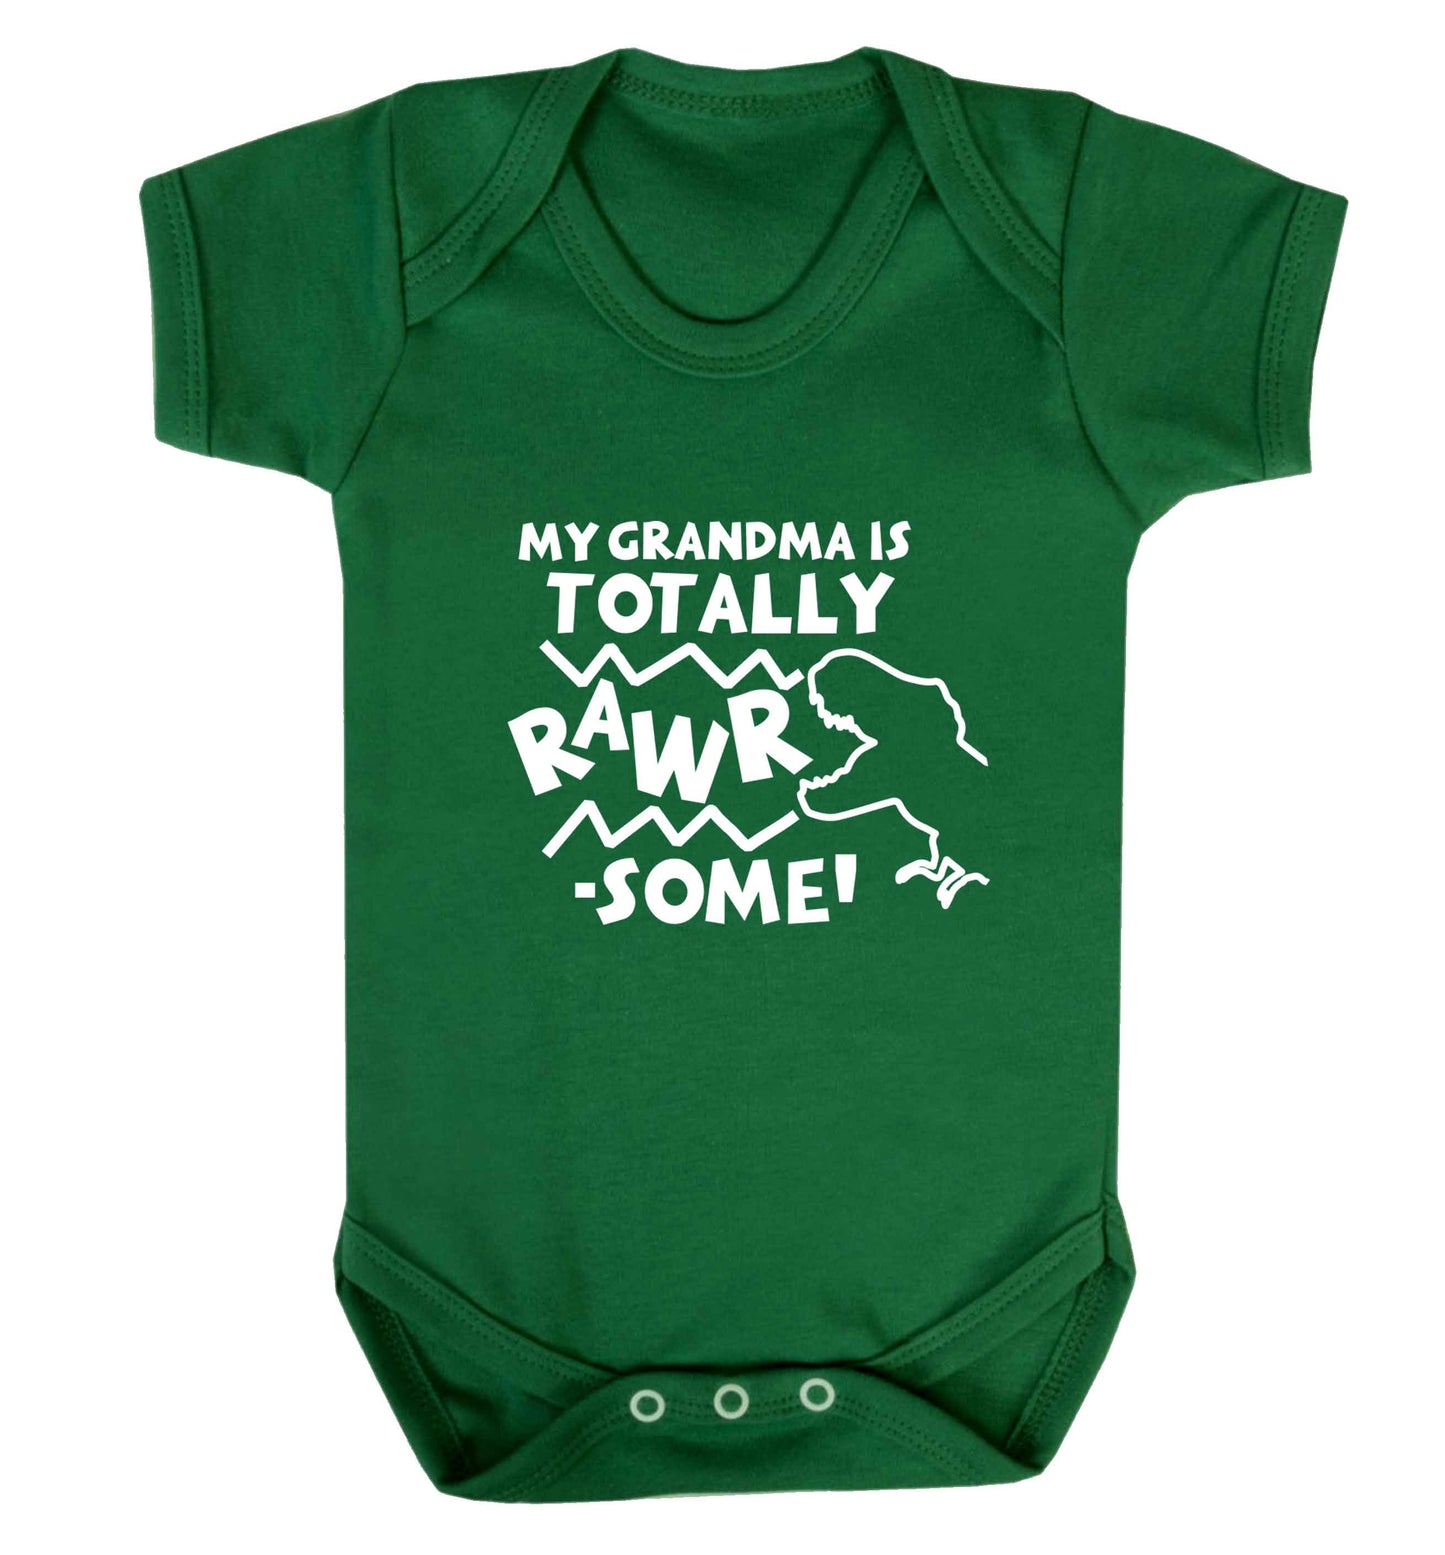 My grandma is totally rawrsome baby vest green 18-24 months